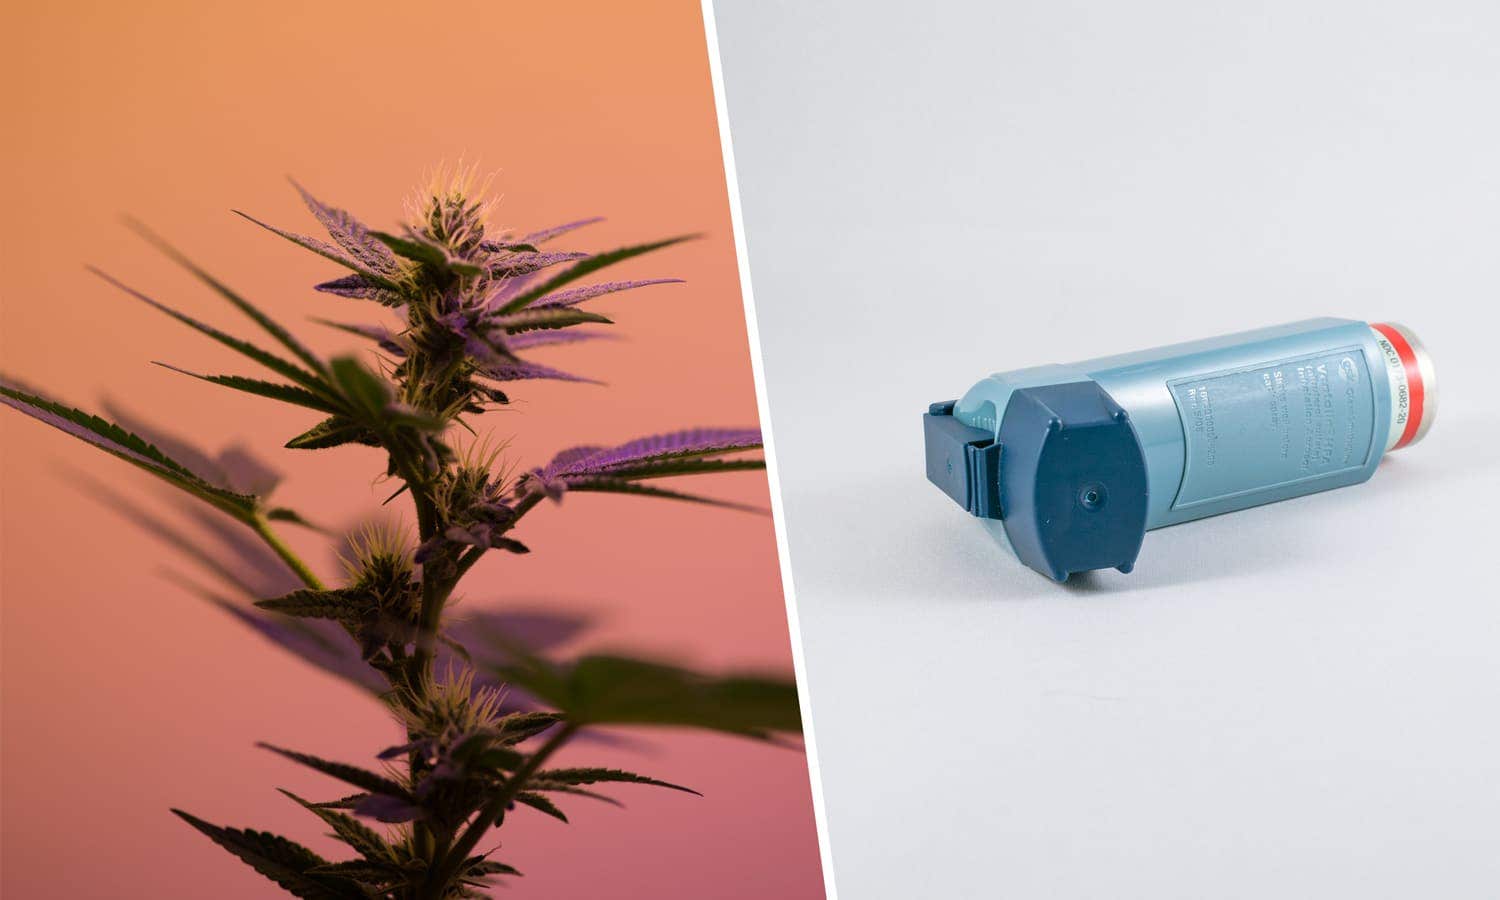 Does Weed Help With Asthma Or Does It Make It Worse?